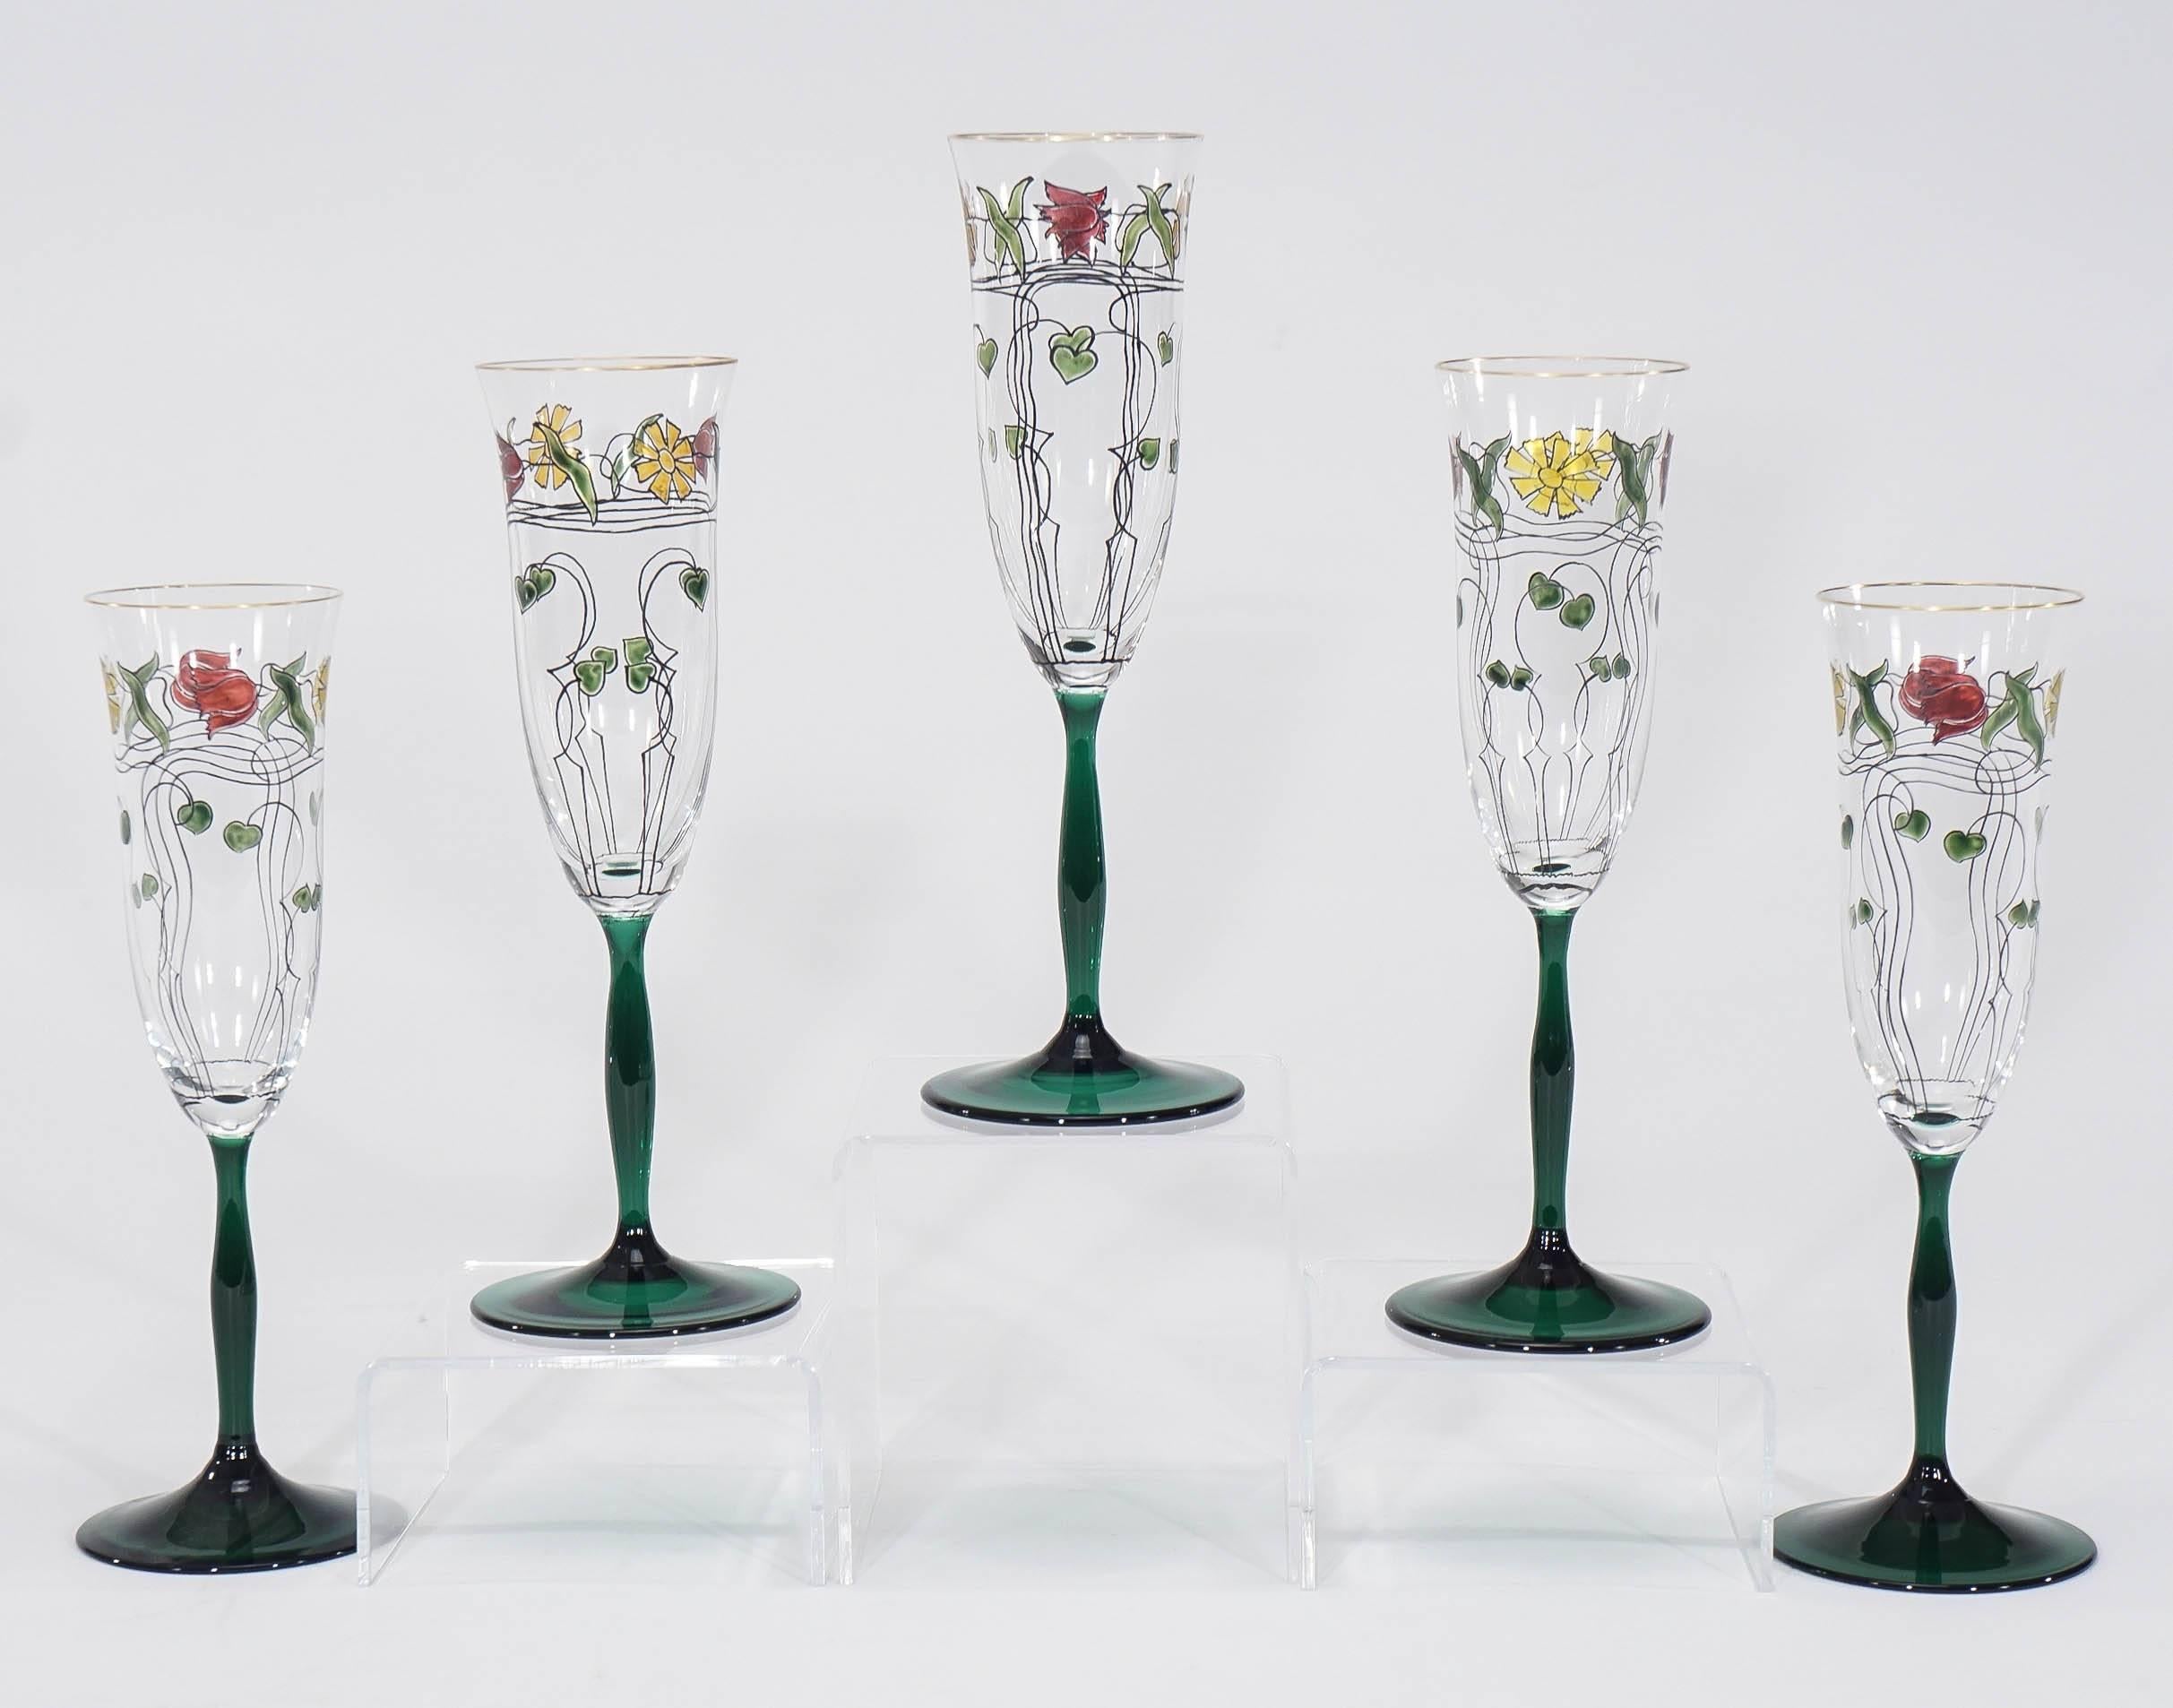 This rare and impressive set of ten tall champagne flutes features clear bowls and emerald green drawn stems which suggest a tulip. The hand-painted poly-chrome floral enamel decoration is beautifully articulated in an Arts and Crafts motif adding